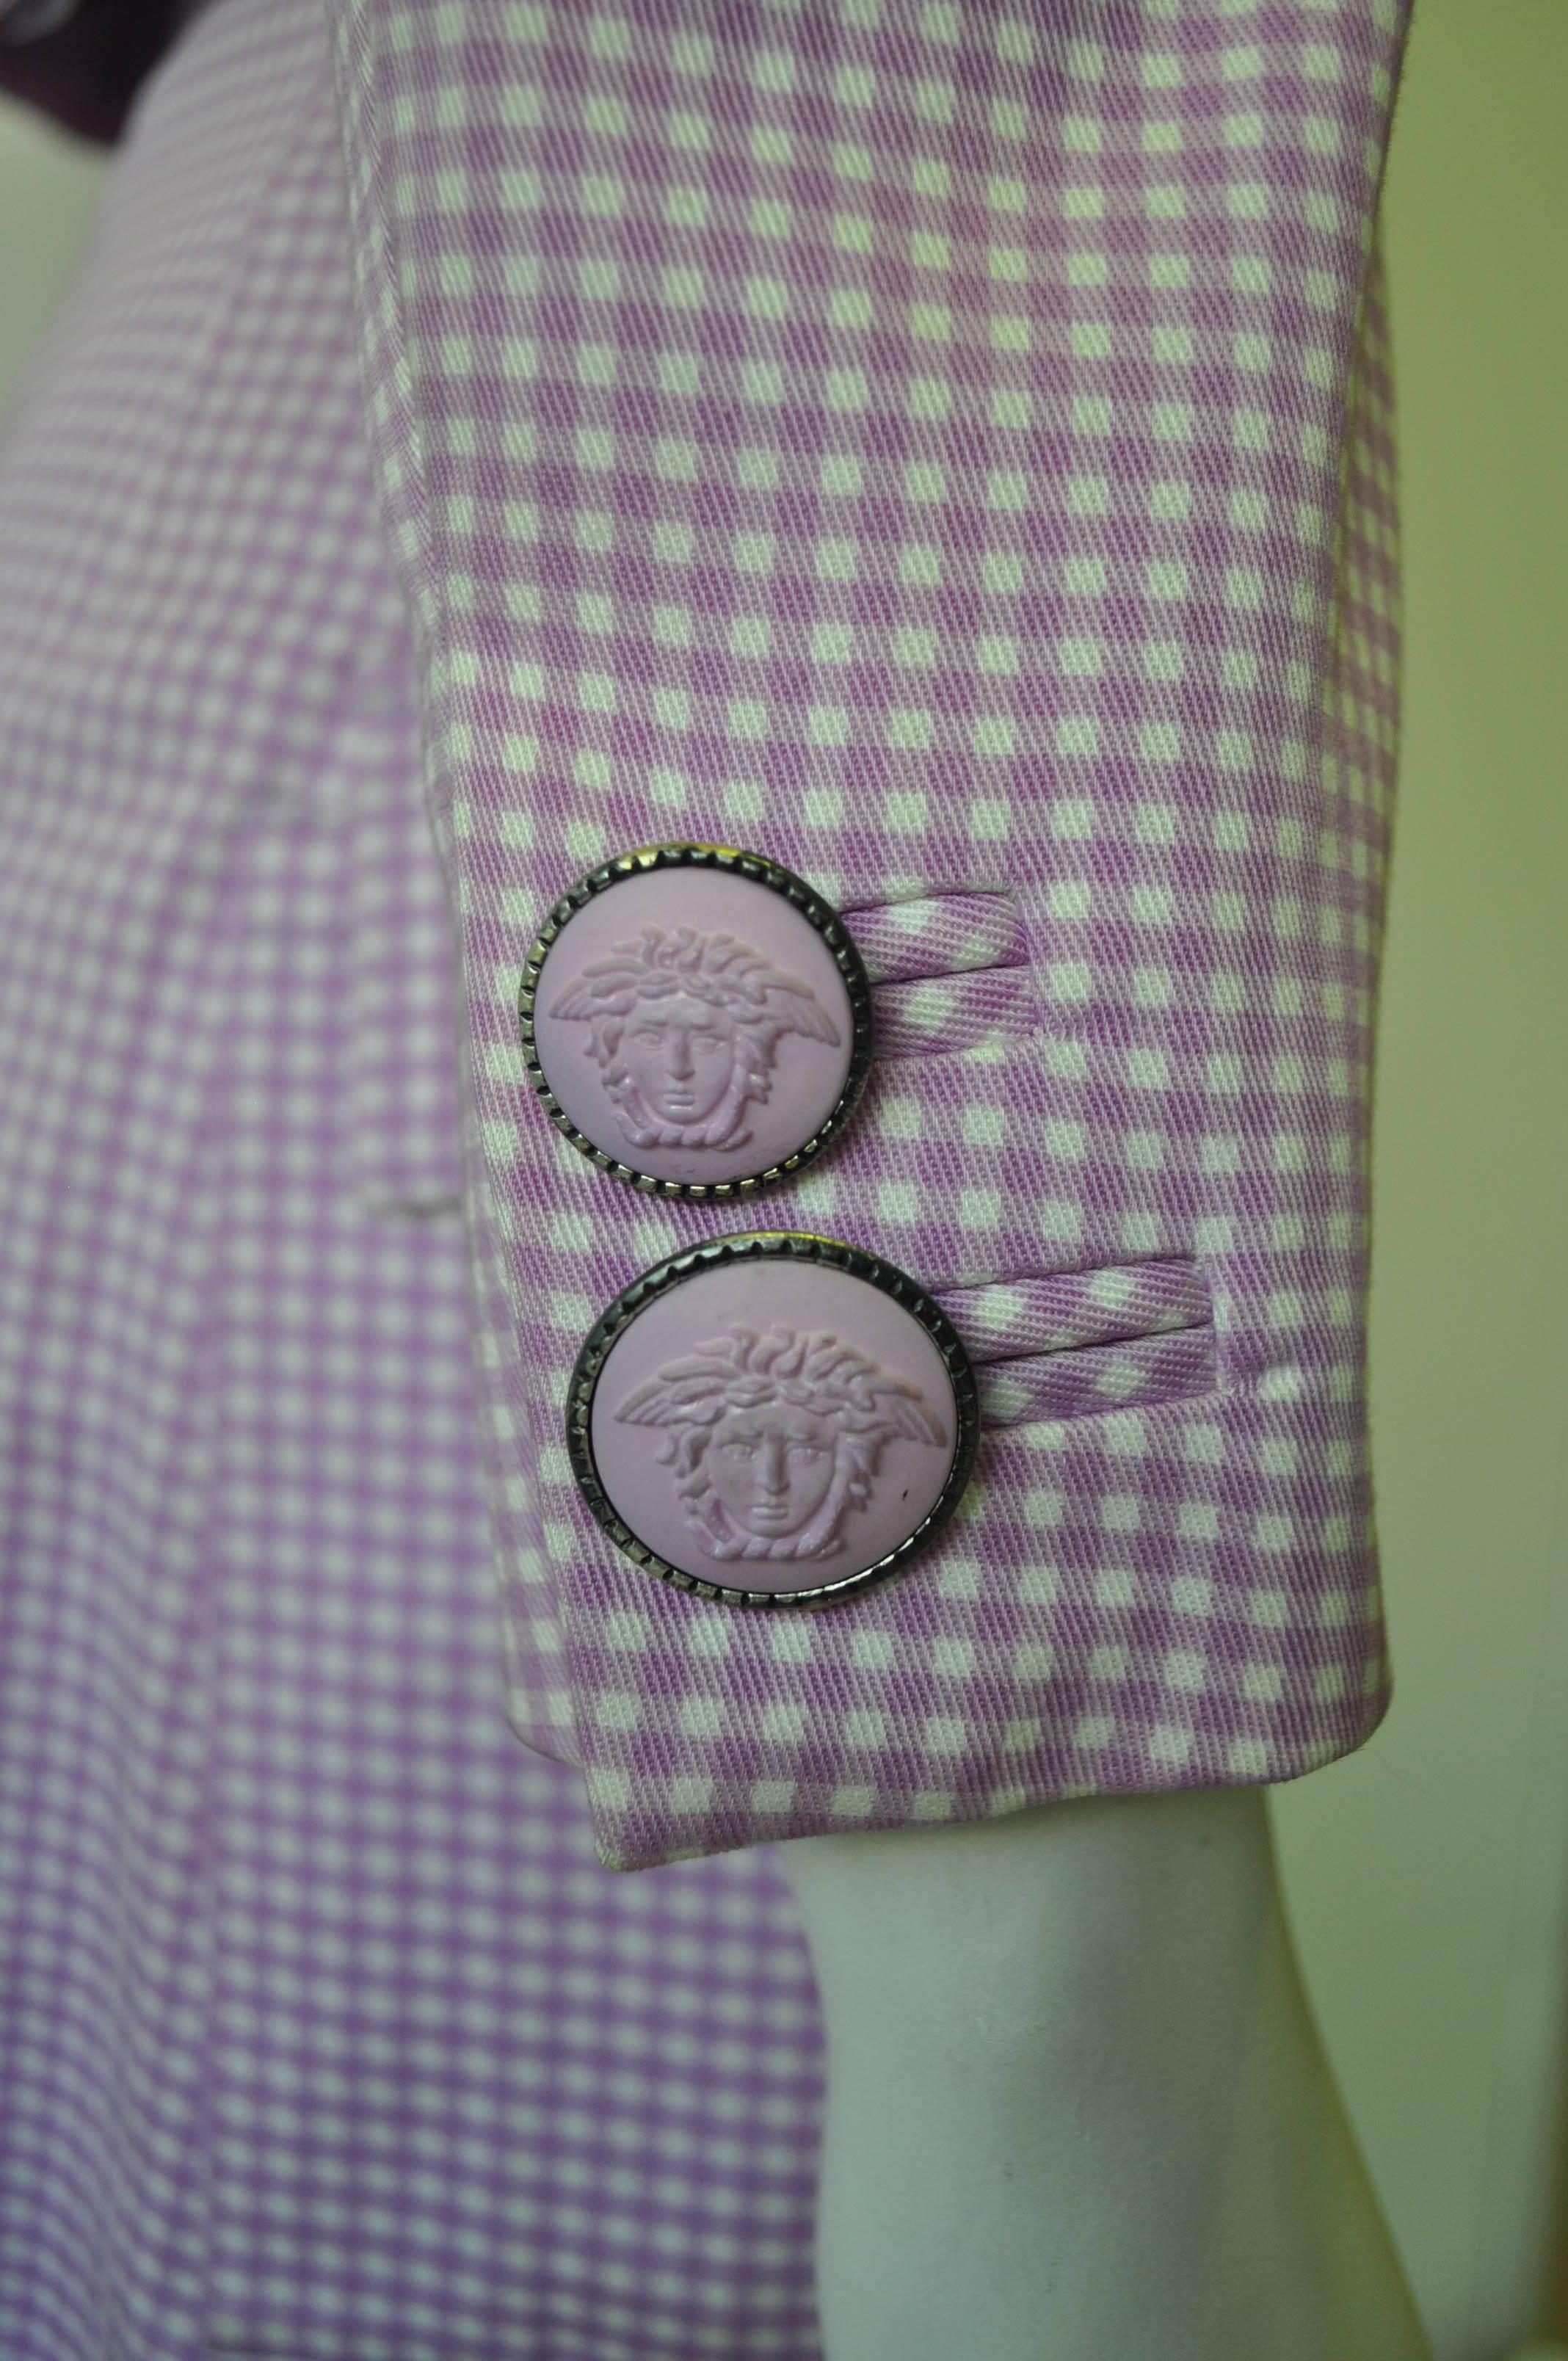 Exceptional Gianni Versace Couture Check Skirt Suit featuring Medusa Buttons For Sale 1